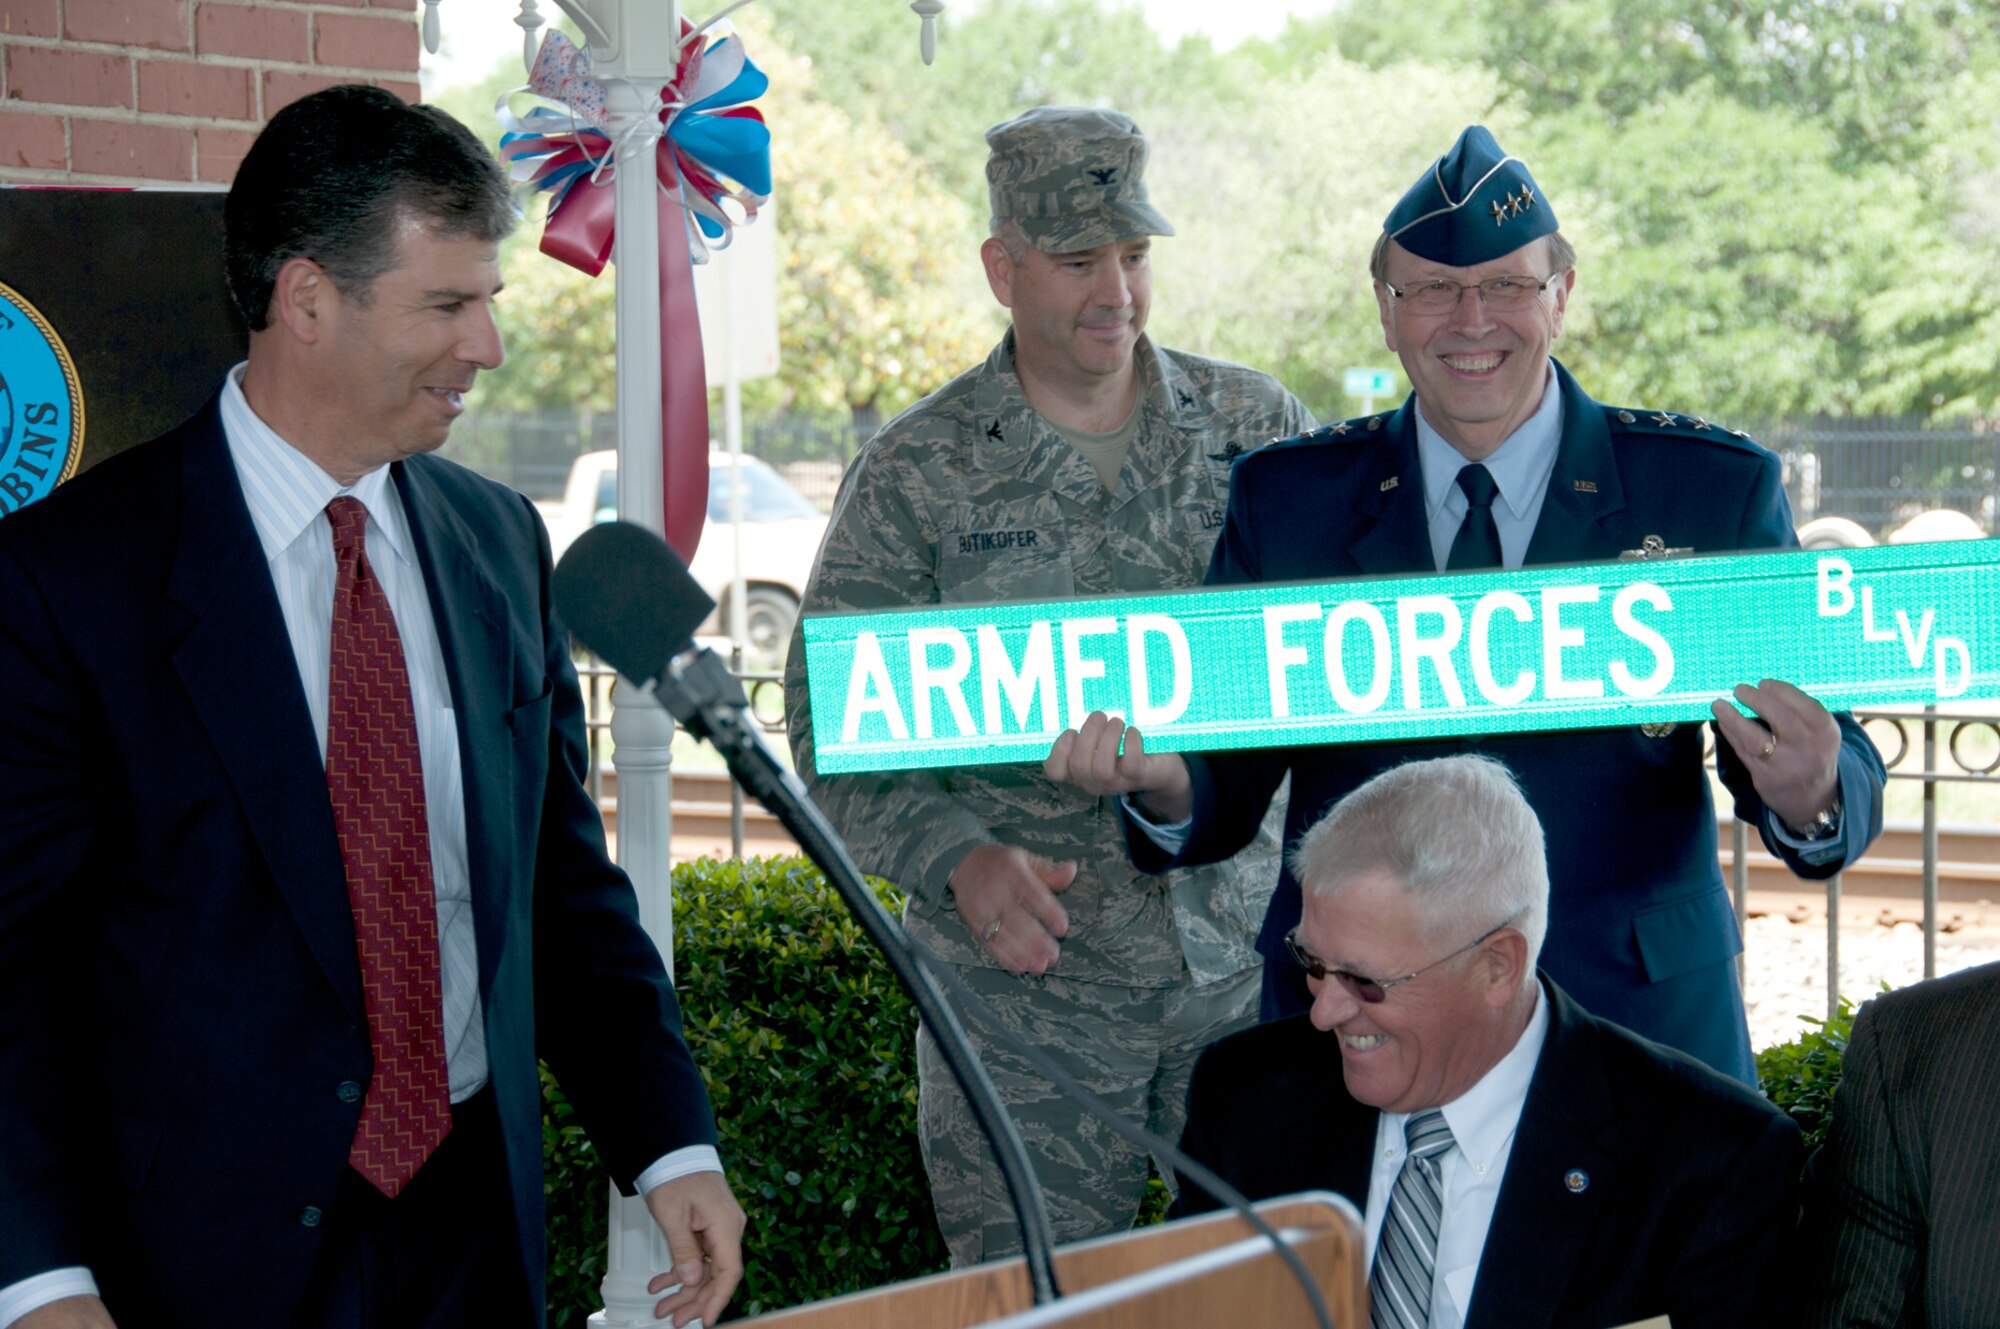 Warner Robins Mayor Chuck Shaheen presents the Armed Forces Boulevard street sign to Lt. Gen. Charles E. Stenner, commander of Air Force Reserve Command, and Col. Mitchel Butikofer, 78th Air Base Wing commander, during the street renaming ceremony April 24. The city renamed North First Street in honor of the men and women of the armed forces at Robins Air Force Base. (U.S. Air Force photo/Staff Sgt. Alexi Saltekoff)